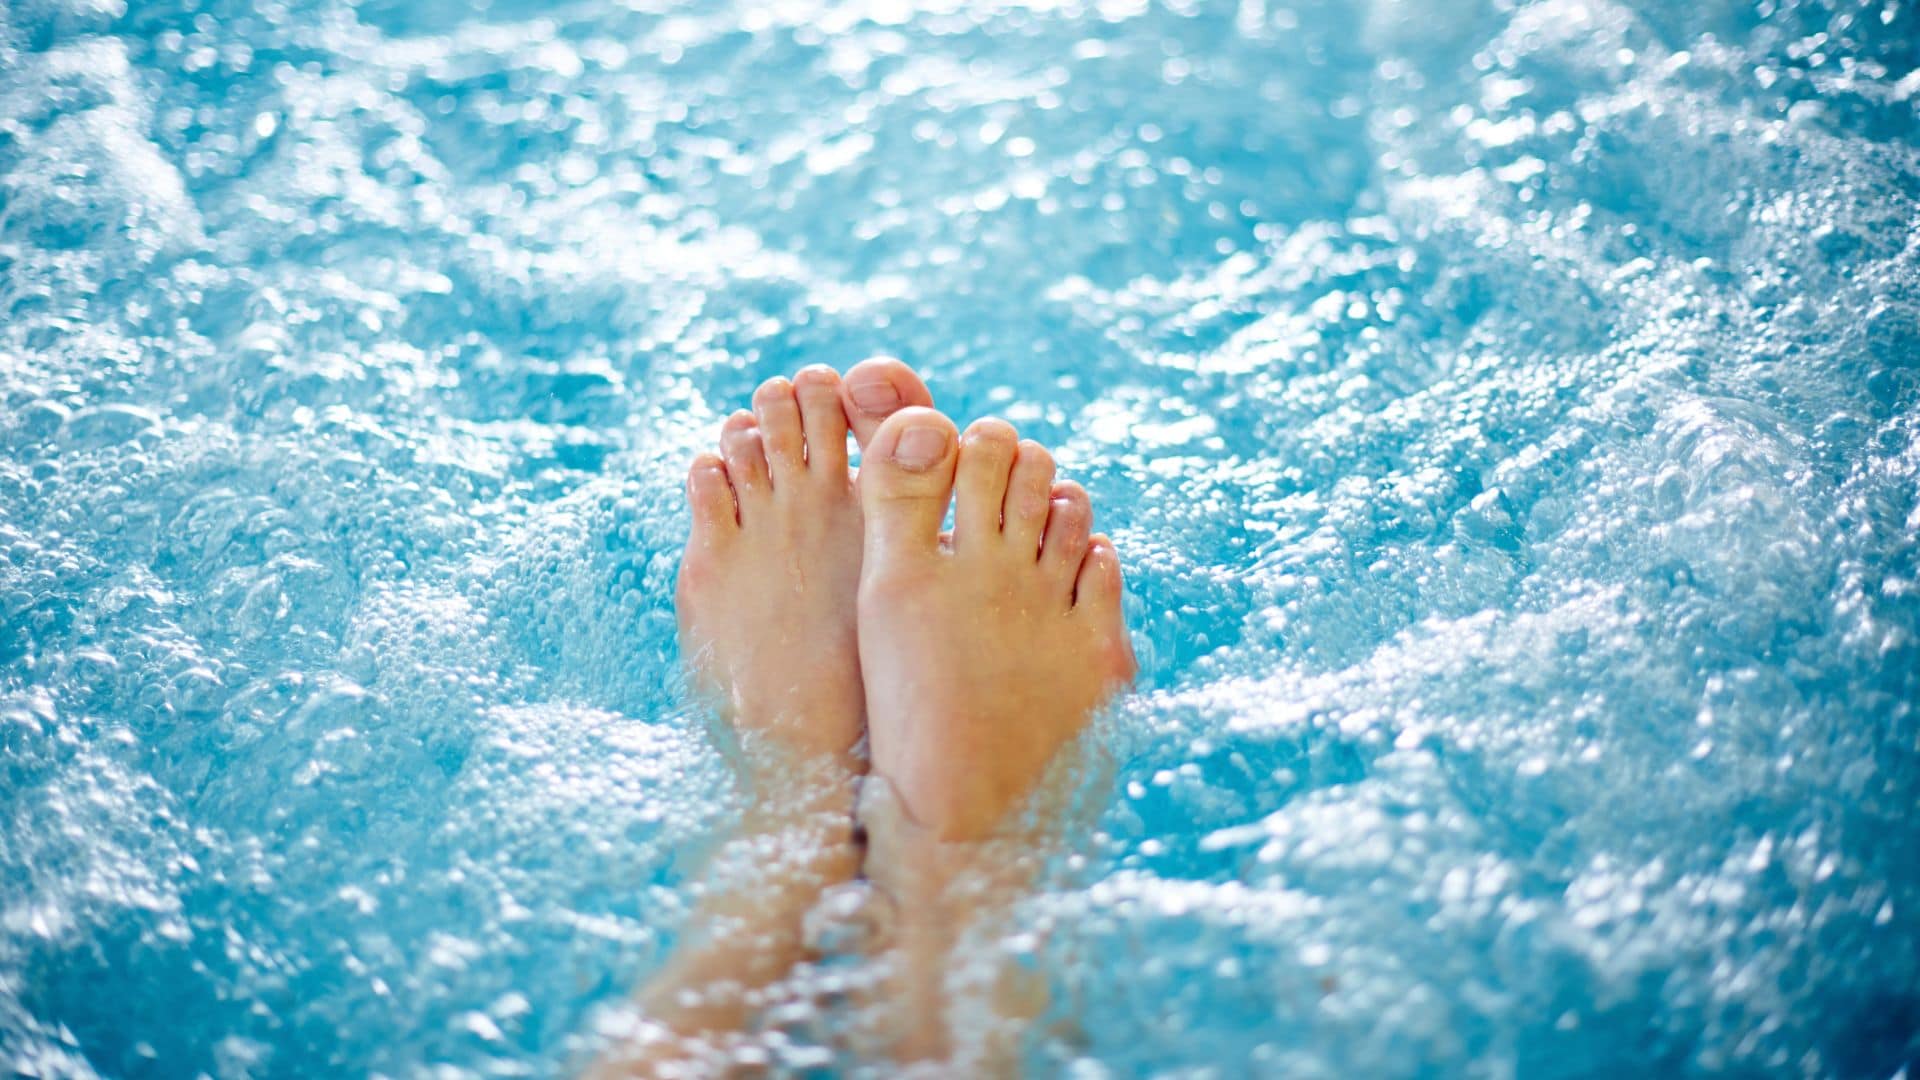 Toes in swirling water good for marketing hot tubs on google